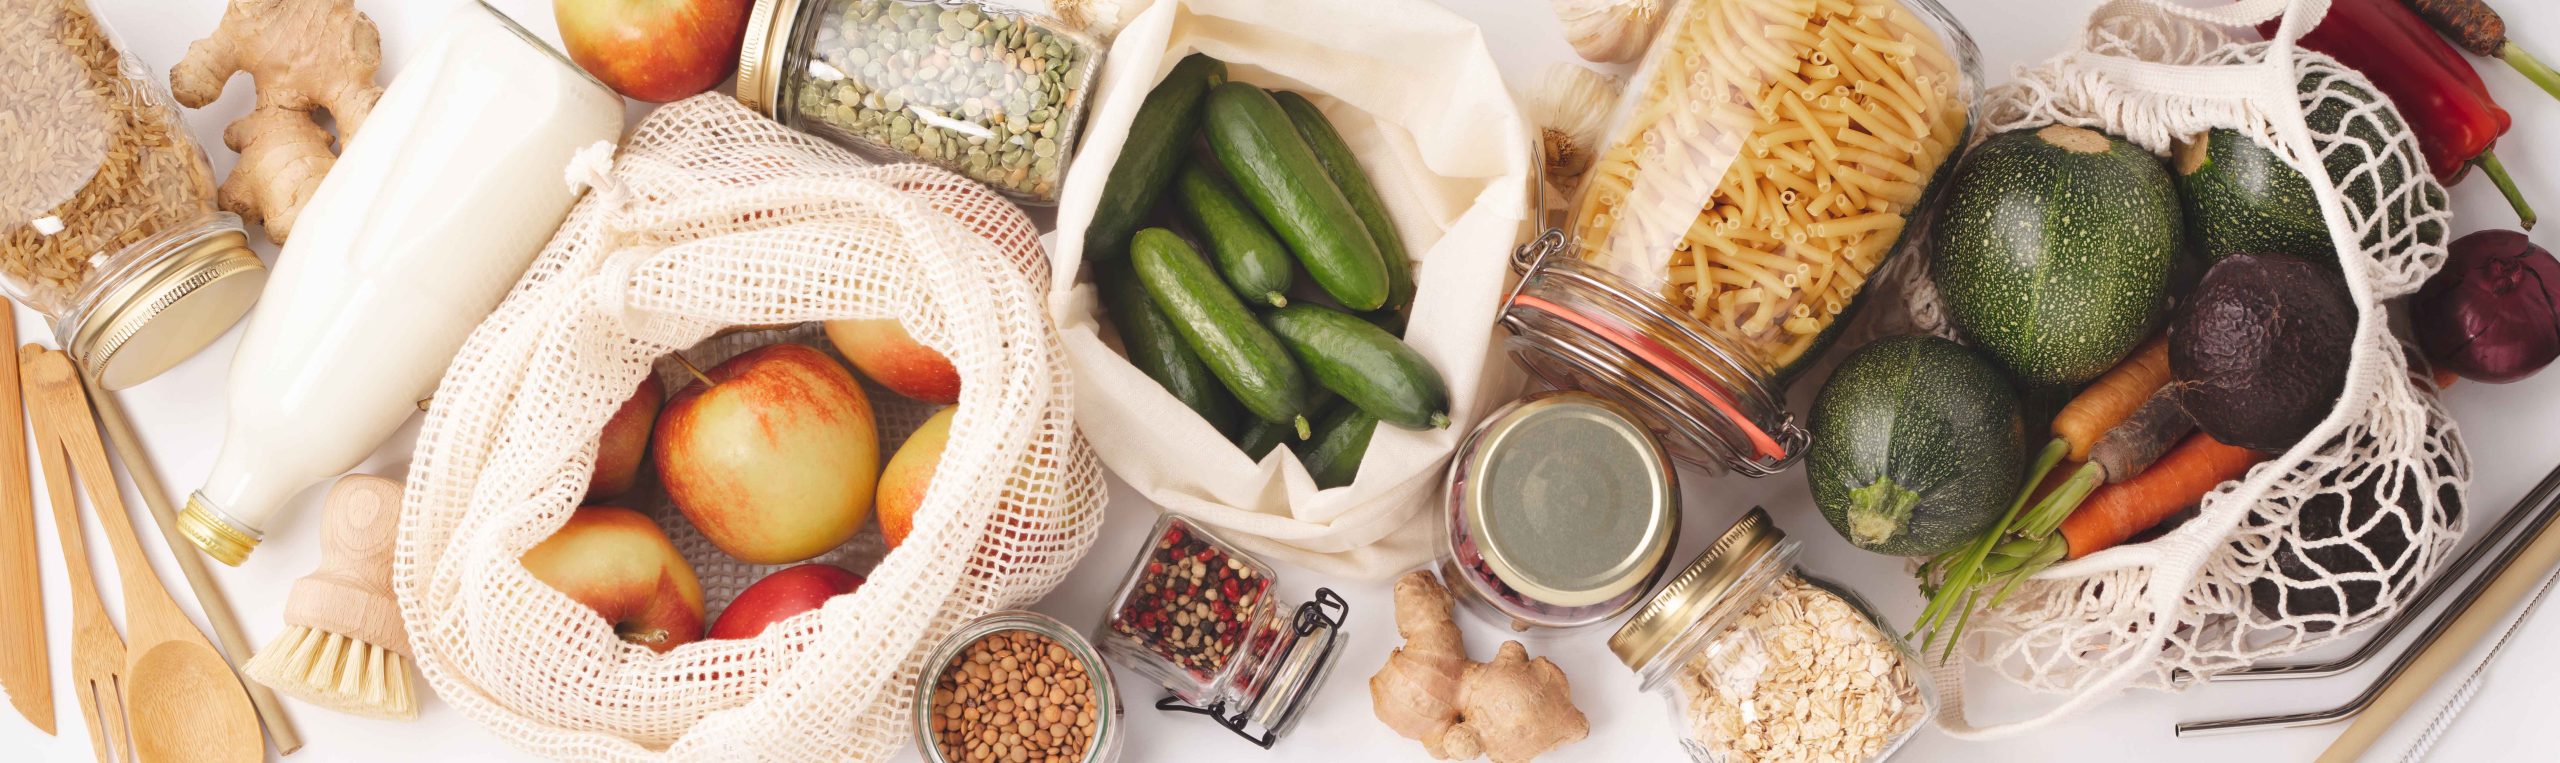 photo with fruits and vegetables, glass jars with beans, lentils, pasta.